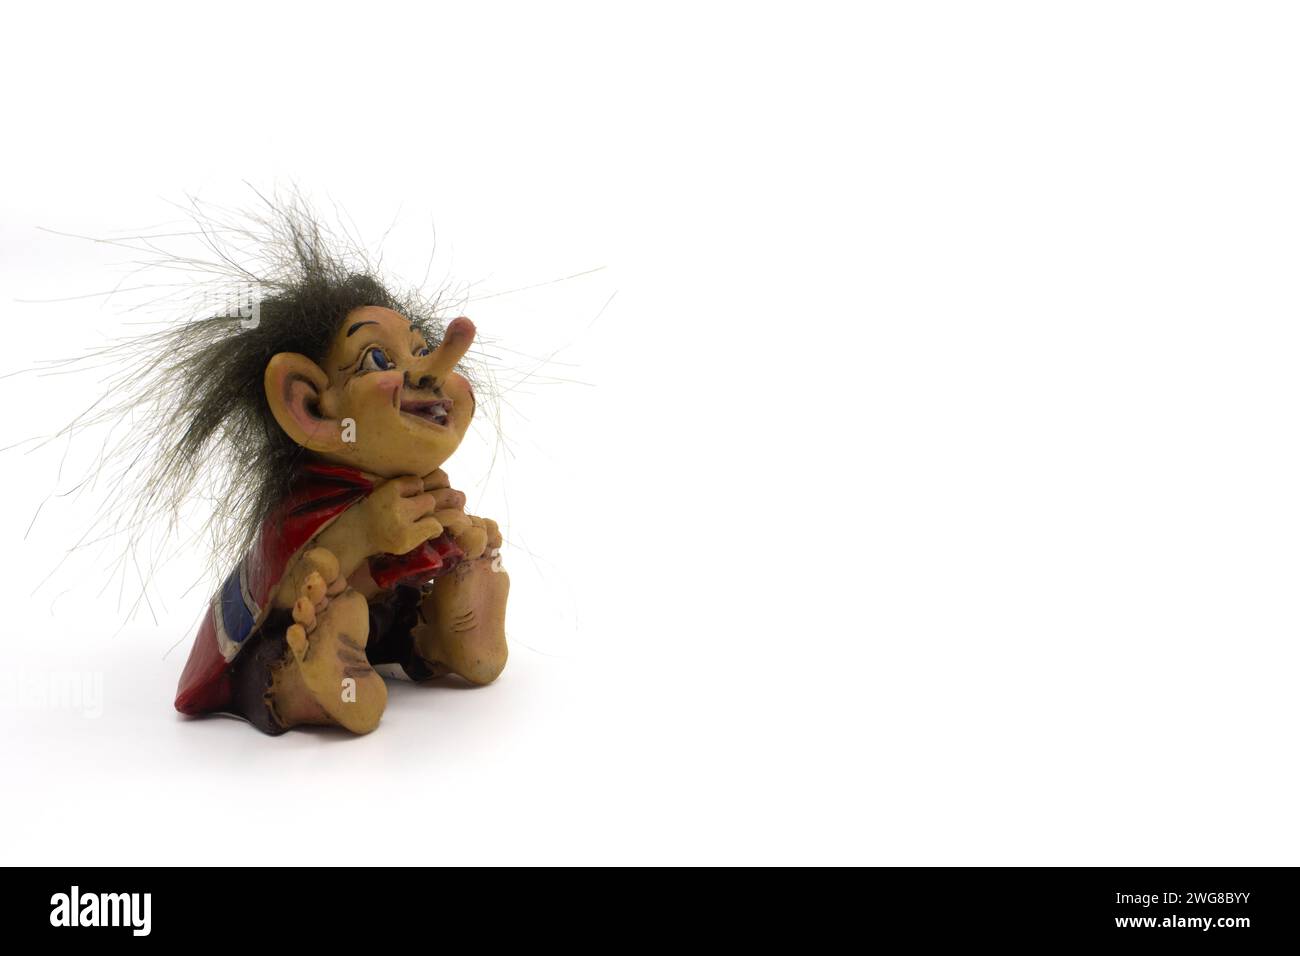 Funny ugly dirty troll toy Stock Photo